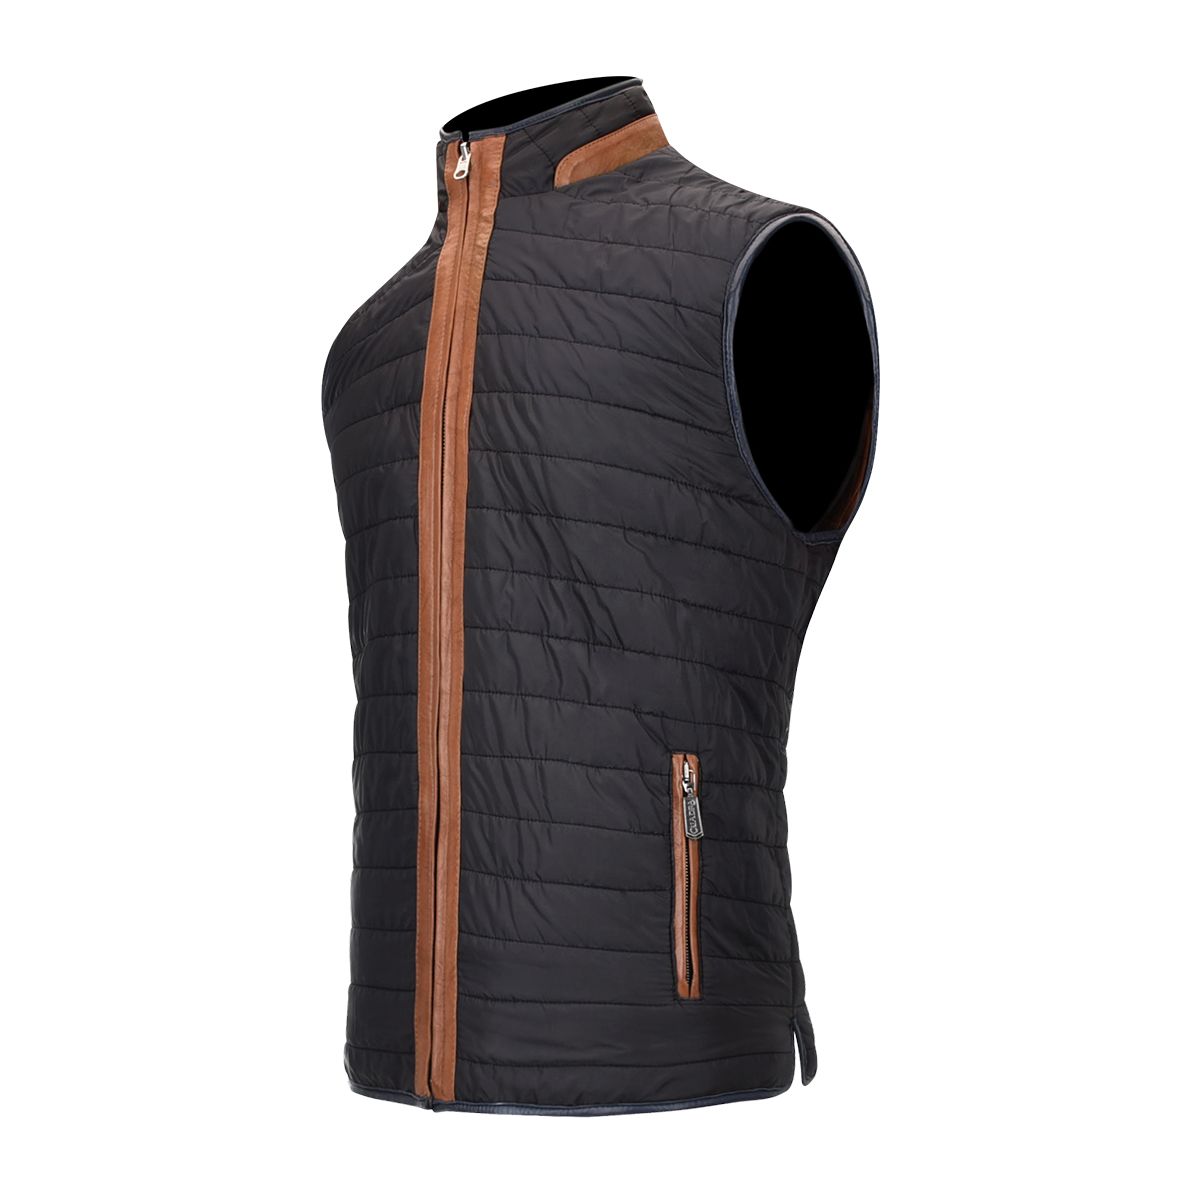 H278BOC - Cuadra brown casual fashion sheepskin leather reversible vest for men-Kuet.us - Cuadra Boots - Western Cowboy, Casual Fashion and Dress Boots